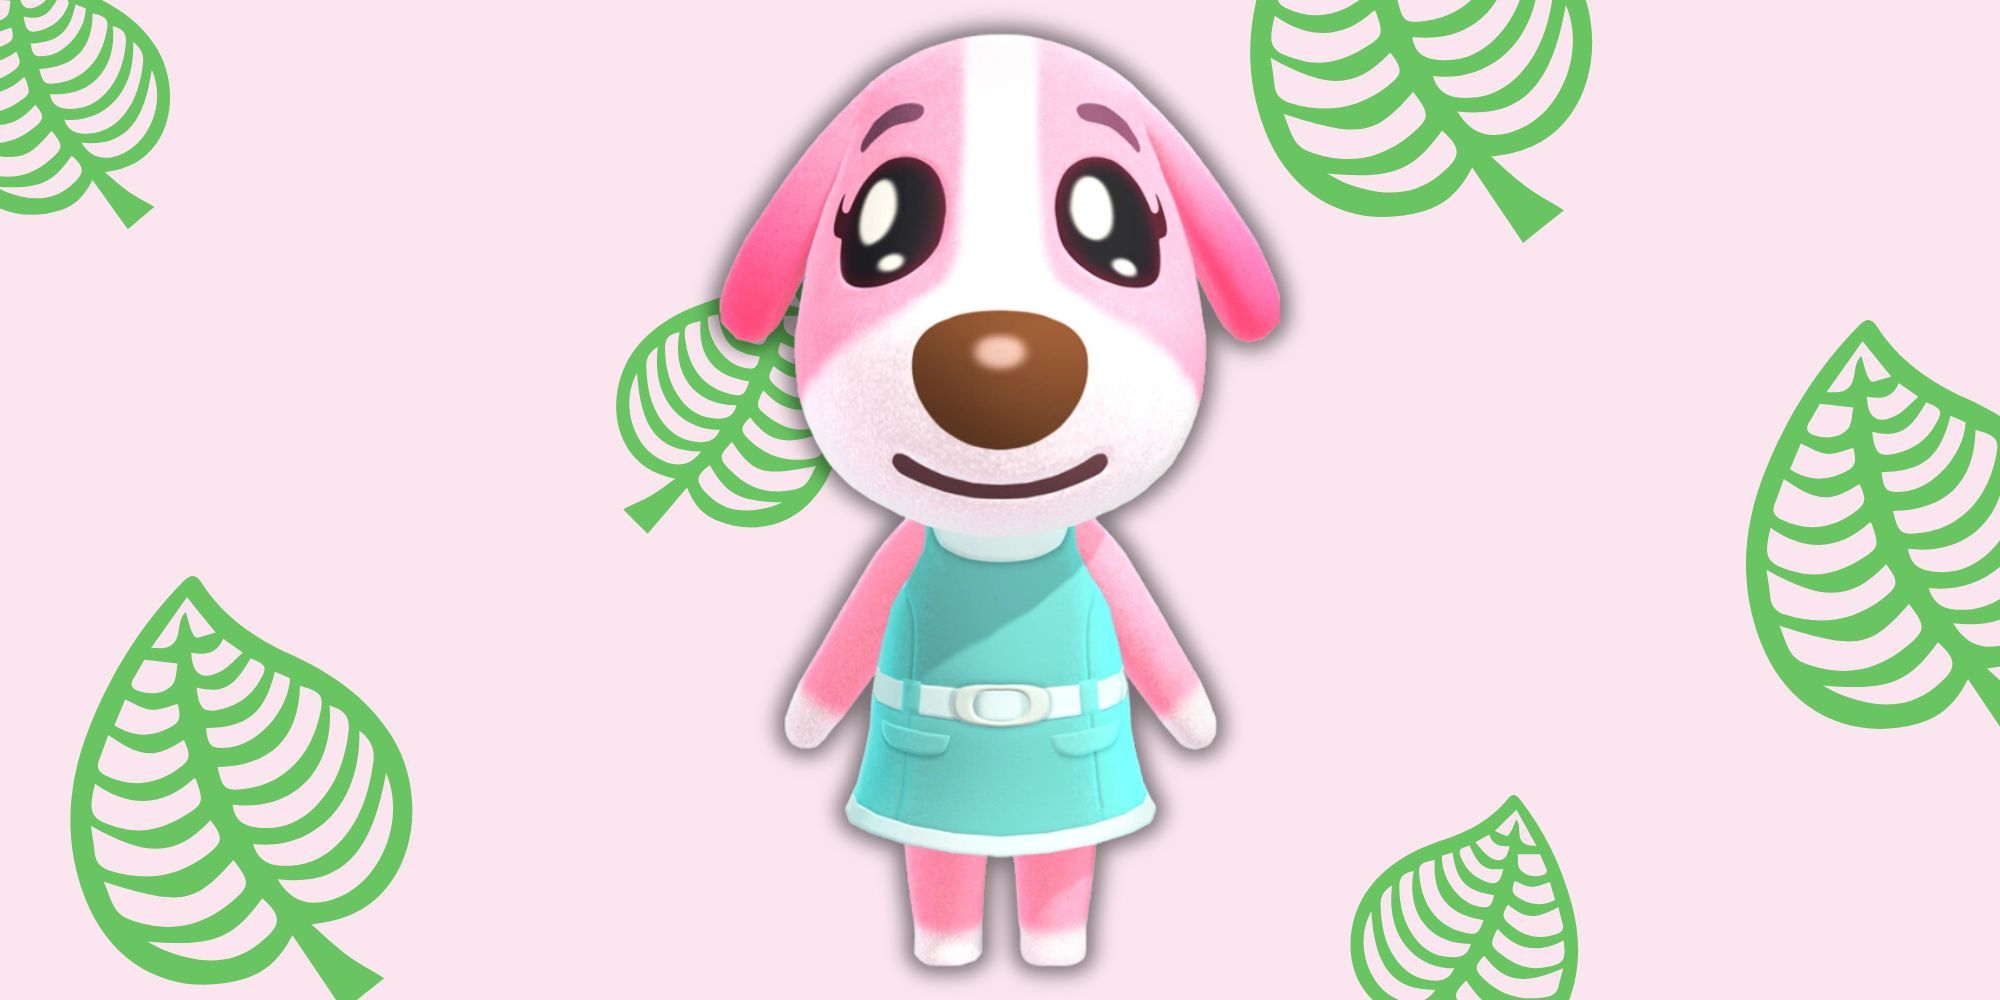 Cookie from Animal Crossing in front of leaf-patterned backdrop